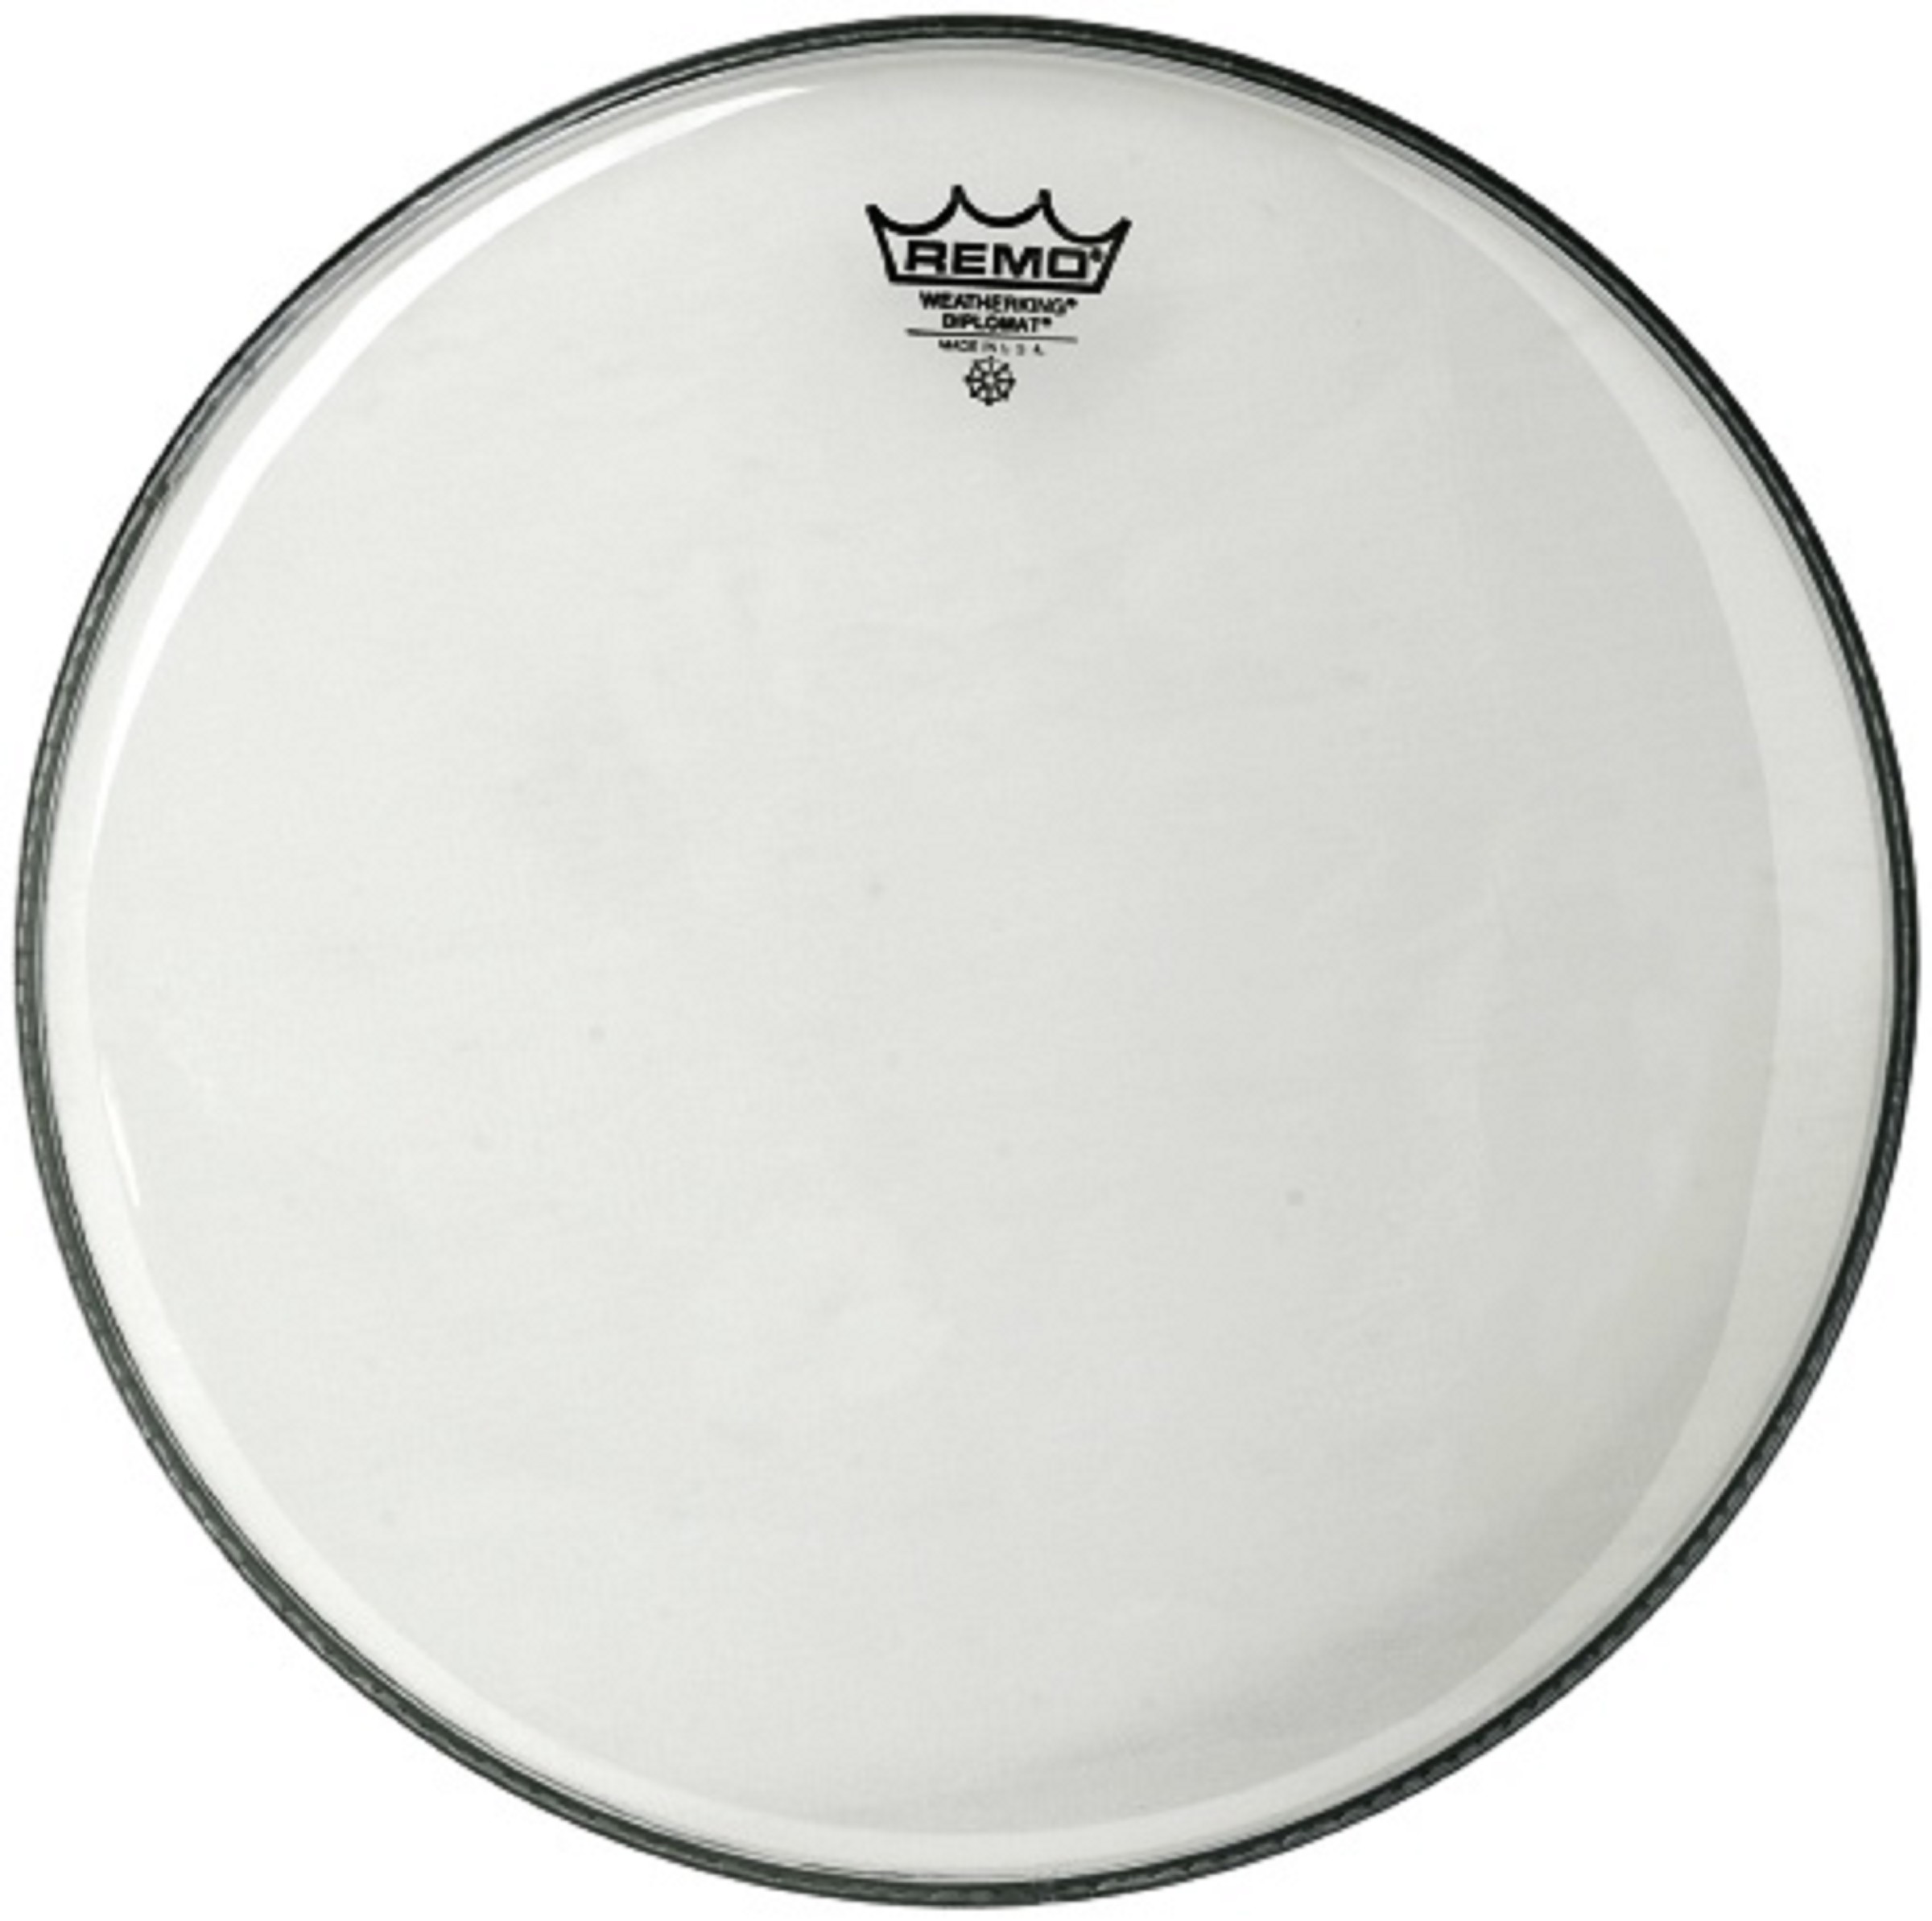 Remo Fell Diplomat 14" Clear